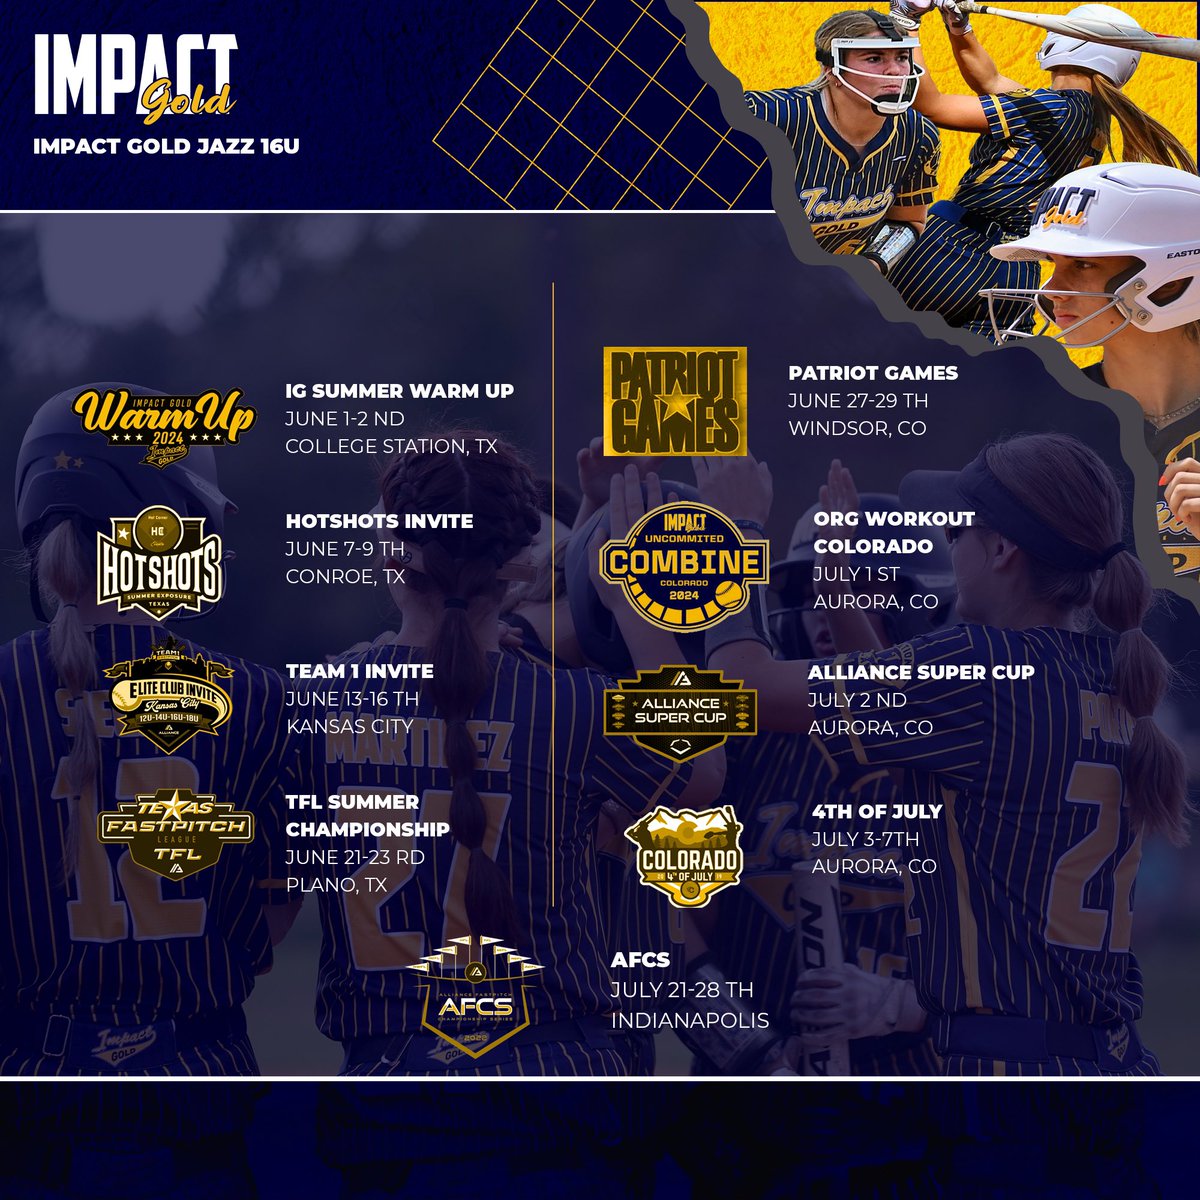 🚨 SUMMER 2024 RECRUITING SCHEDULE RELEASE 🚨 This is where you can find us this summer!! #betheimpact #goldblooded #trusttheprocess #igjazz16u